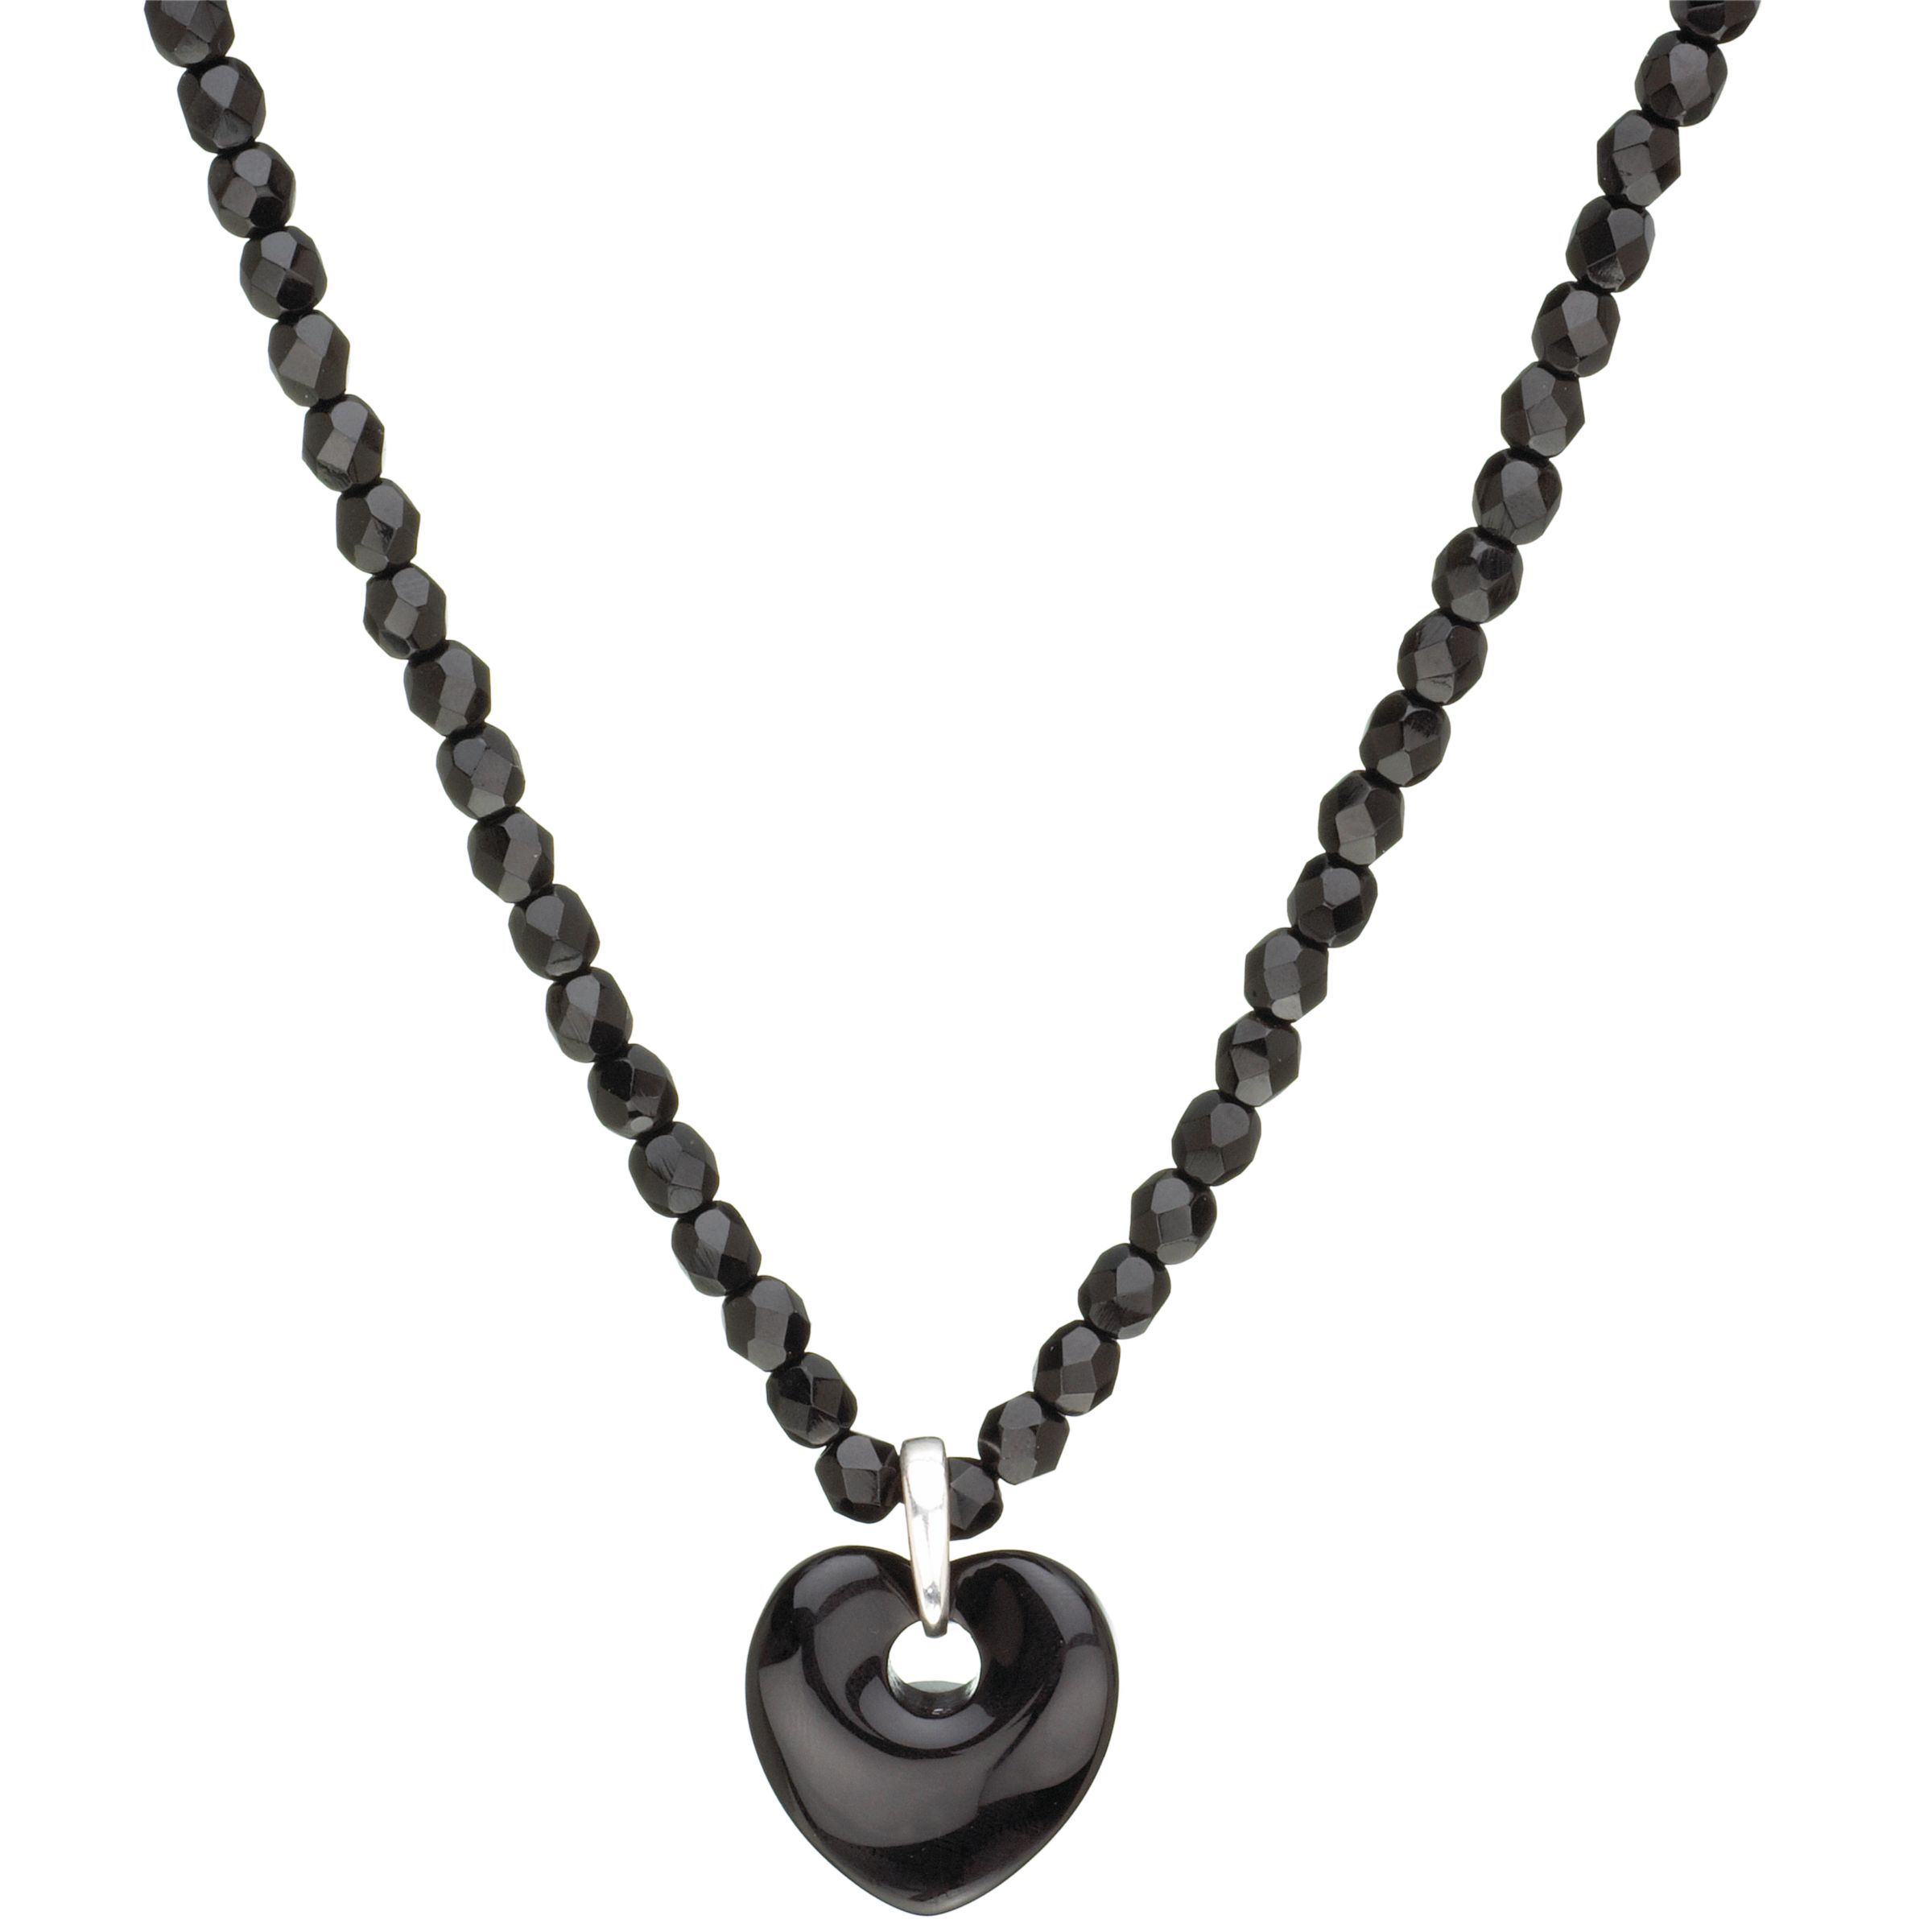 MJ1306 Bohemian Glass Necklace with Onyx Heart Pendant